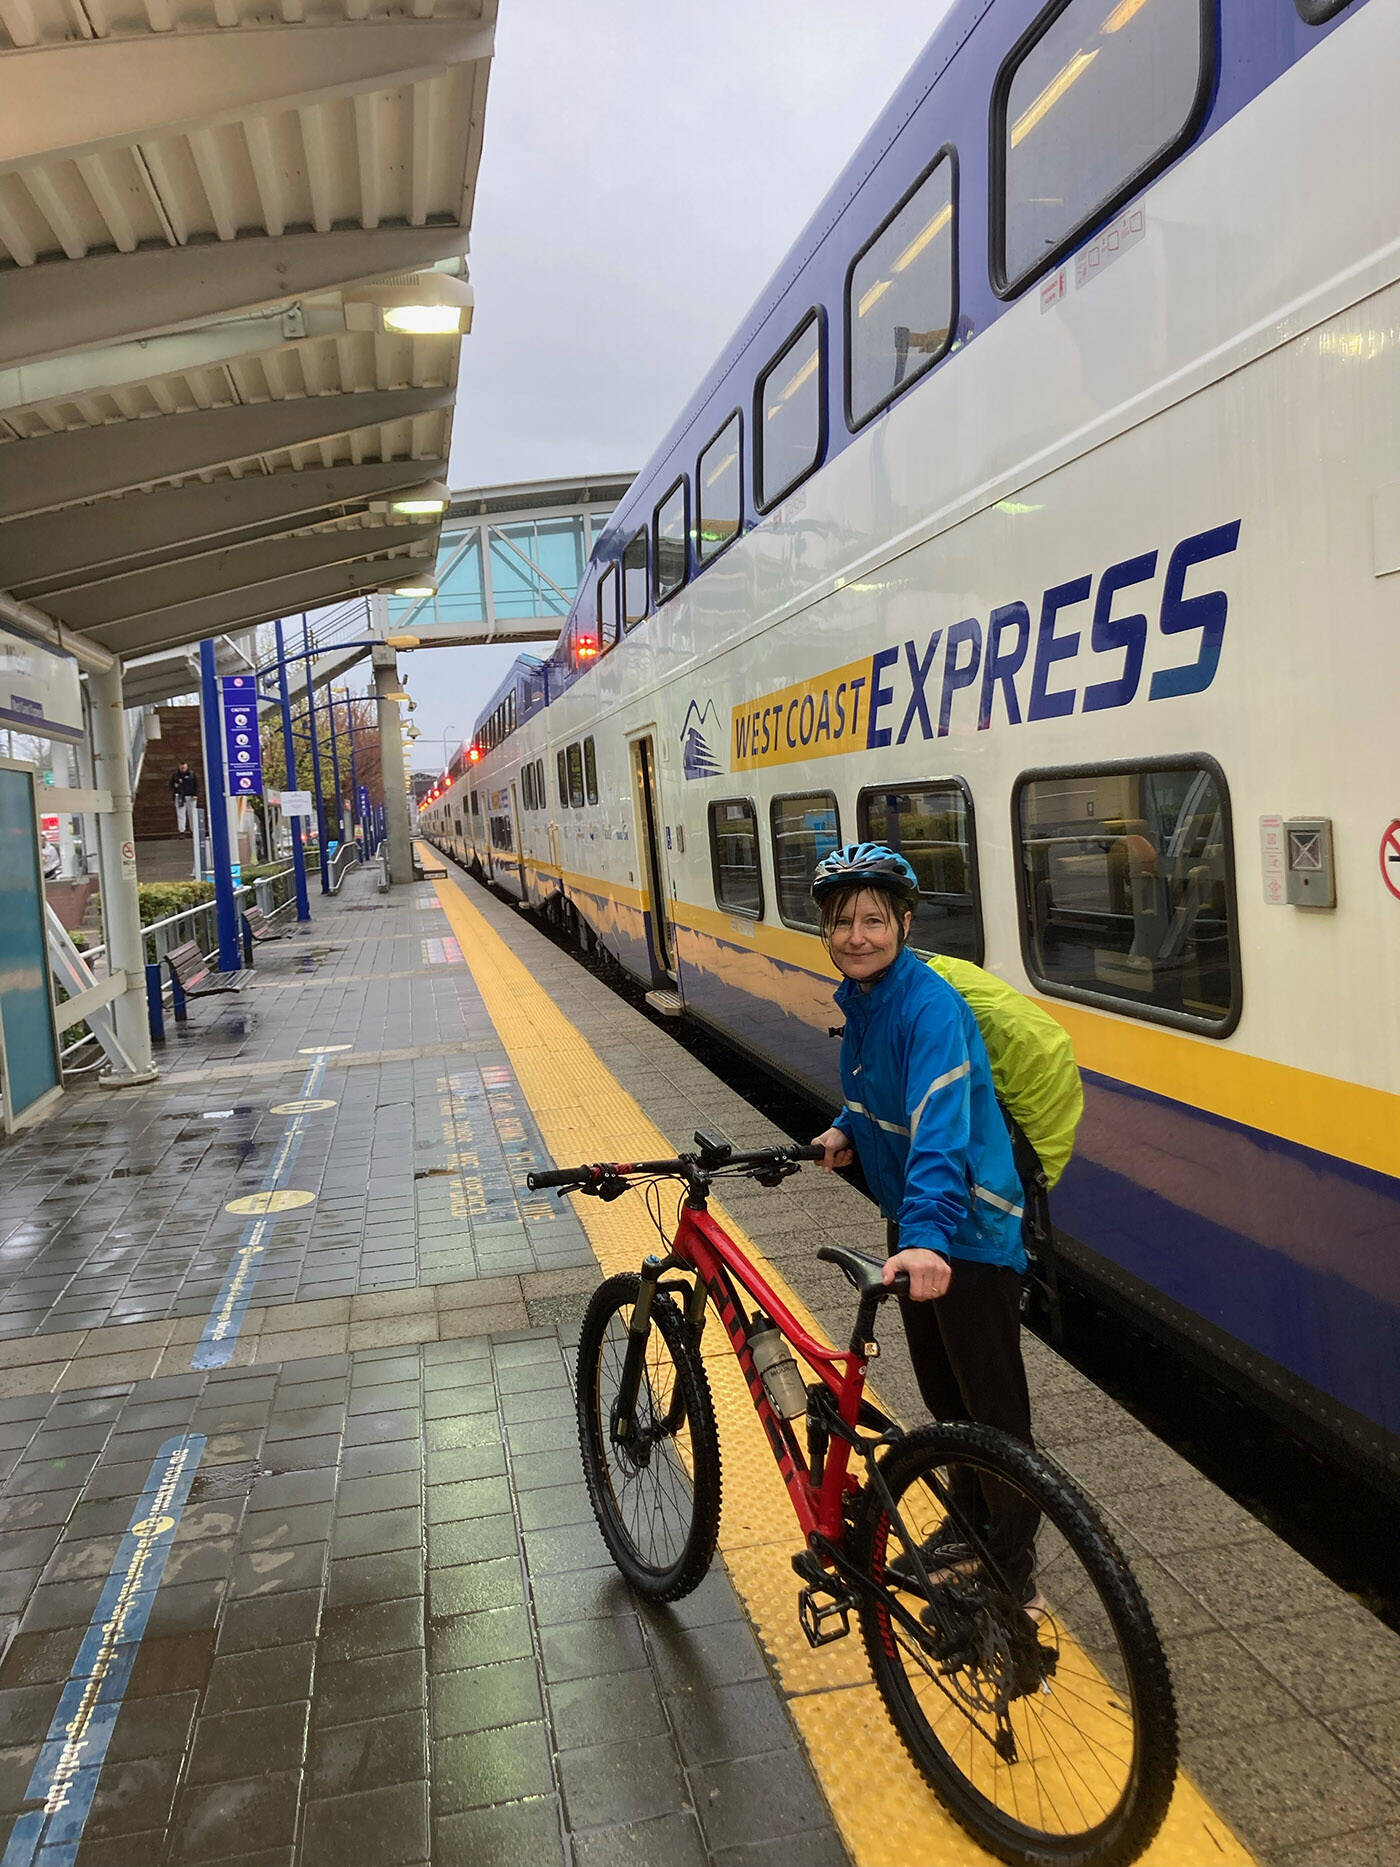 Barbara Nickel at the West Coast Express station in Mission. (Photo submitted by Barbara Nickel)